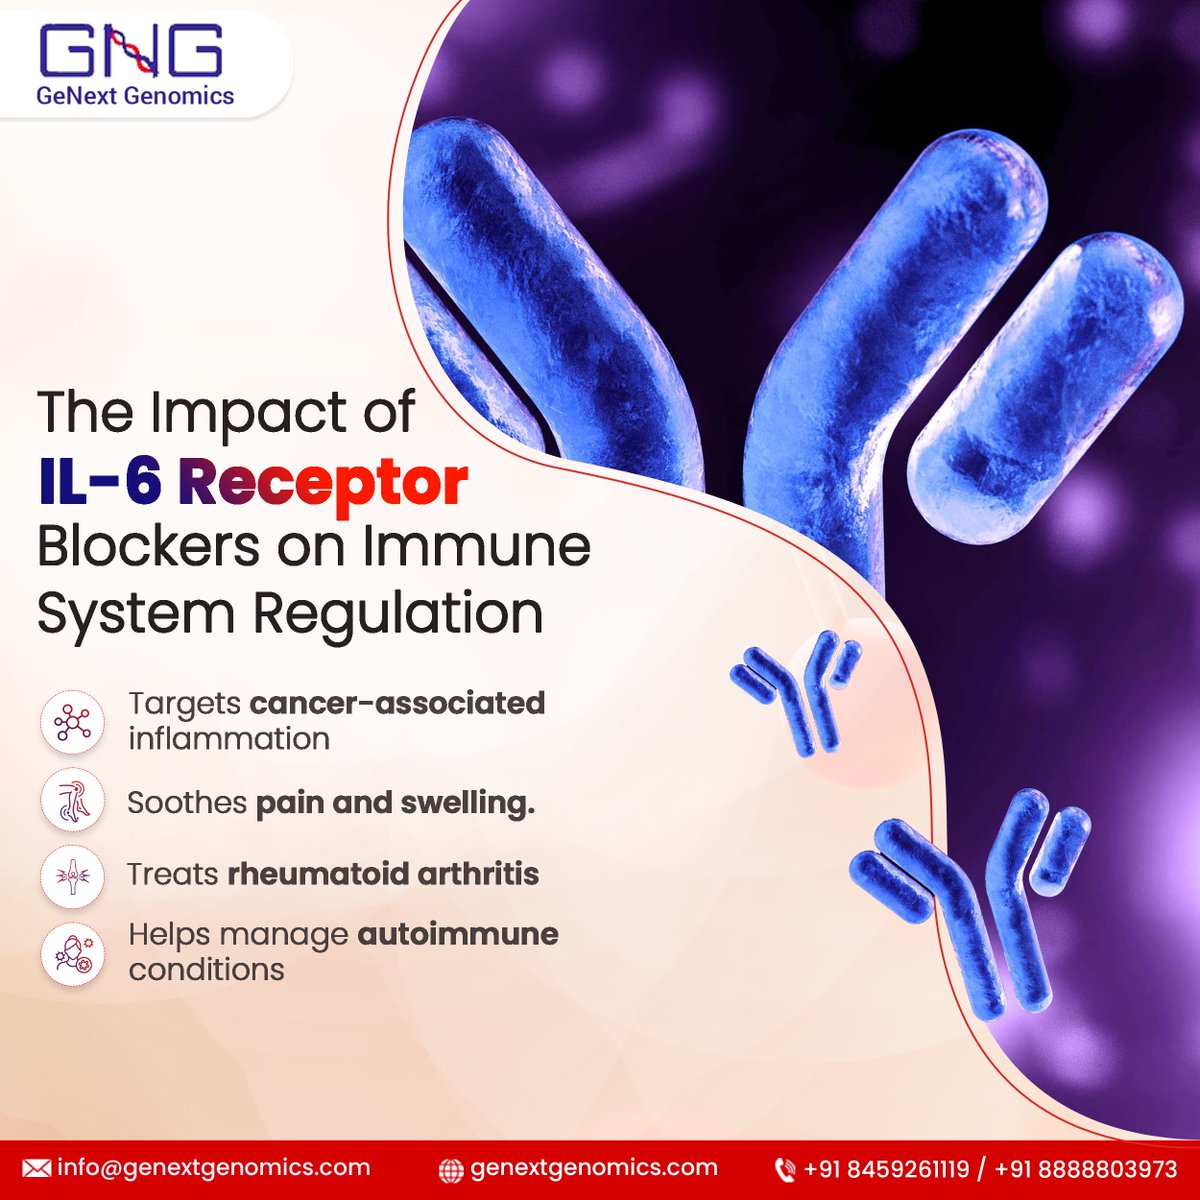 The IL-6 receptor monoclonal antibody is a type of medication used in the treatment of certain inflammatory conditions.
.
#genext #IL6Receptor #MonoclonalAntibody #Treatment #InflammatoryConditions #AutoimmuneDiseases #RheumatoidArthritis #CancerTreatment #Tocilizumab #Sarilumab